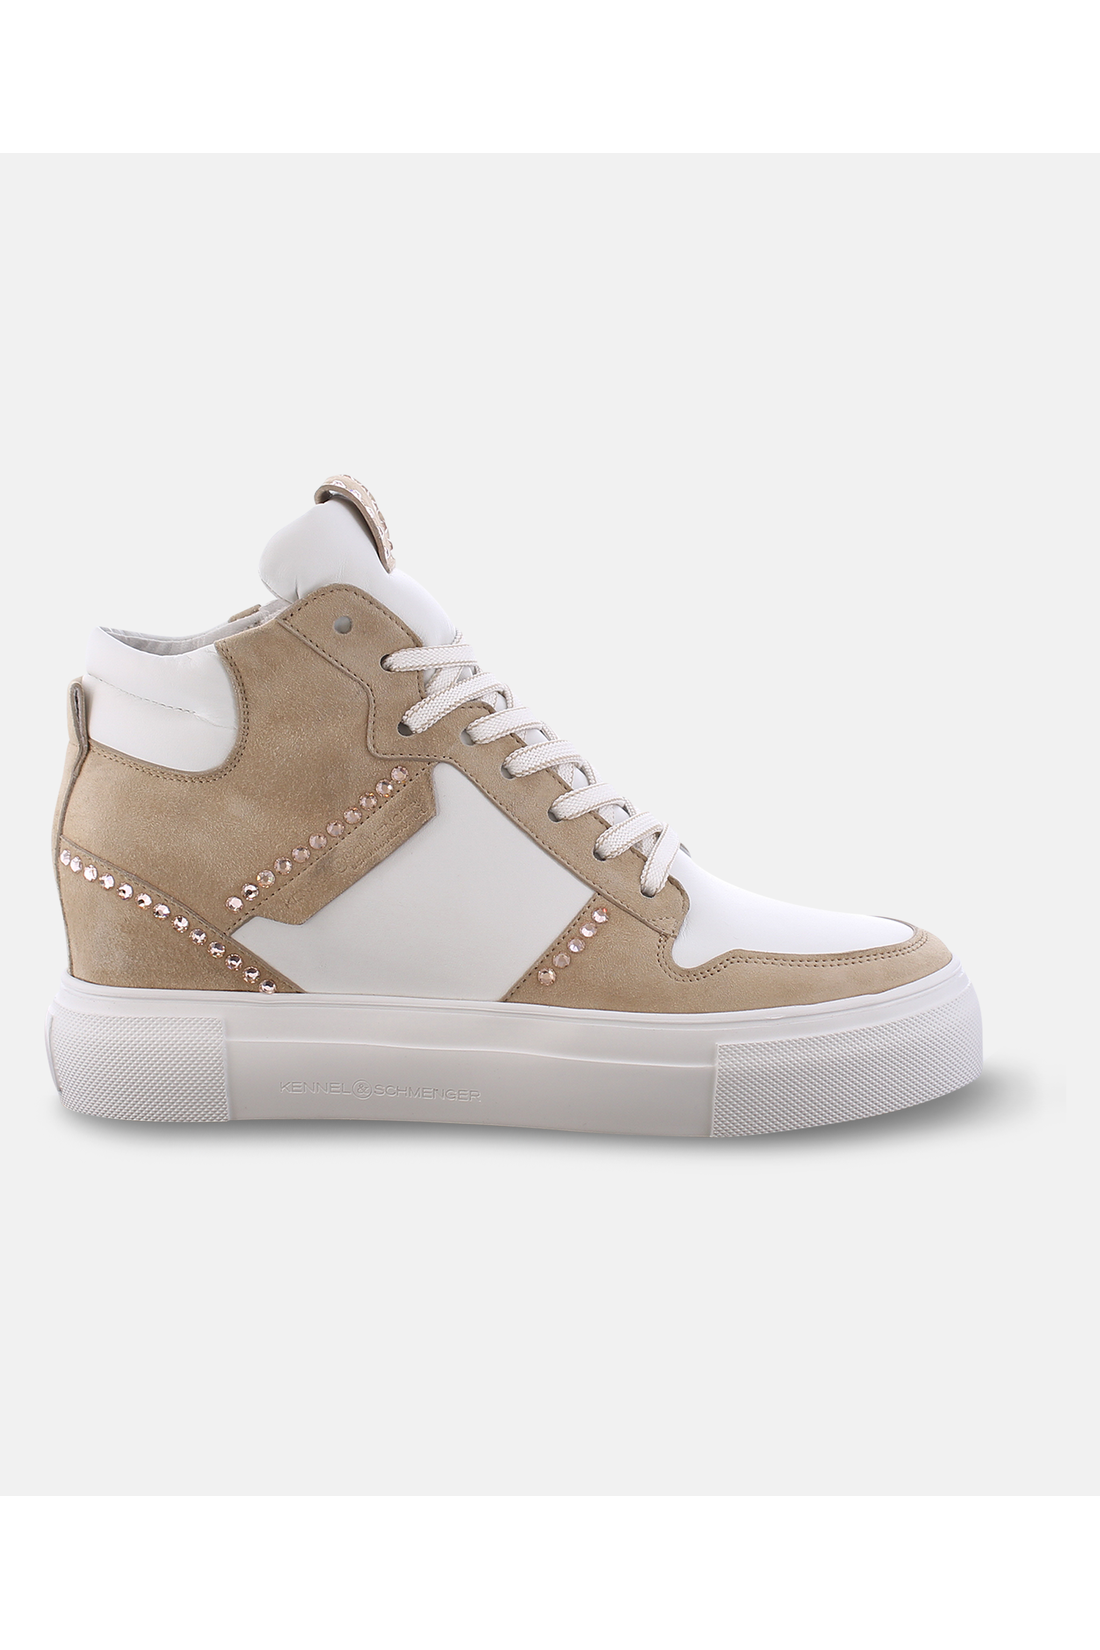 Kennel-Schmenger-OUTLET-SALE-CHAMP-Sneakers-ARCHIVE-COLLECTION-3.png